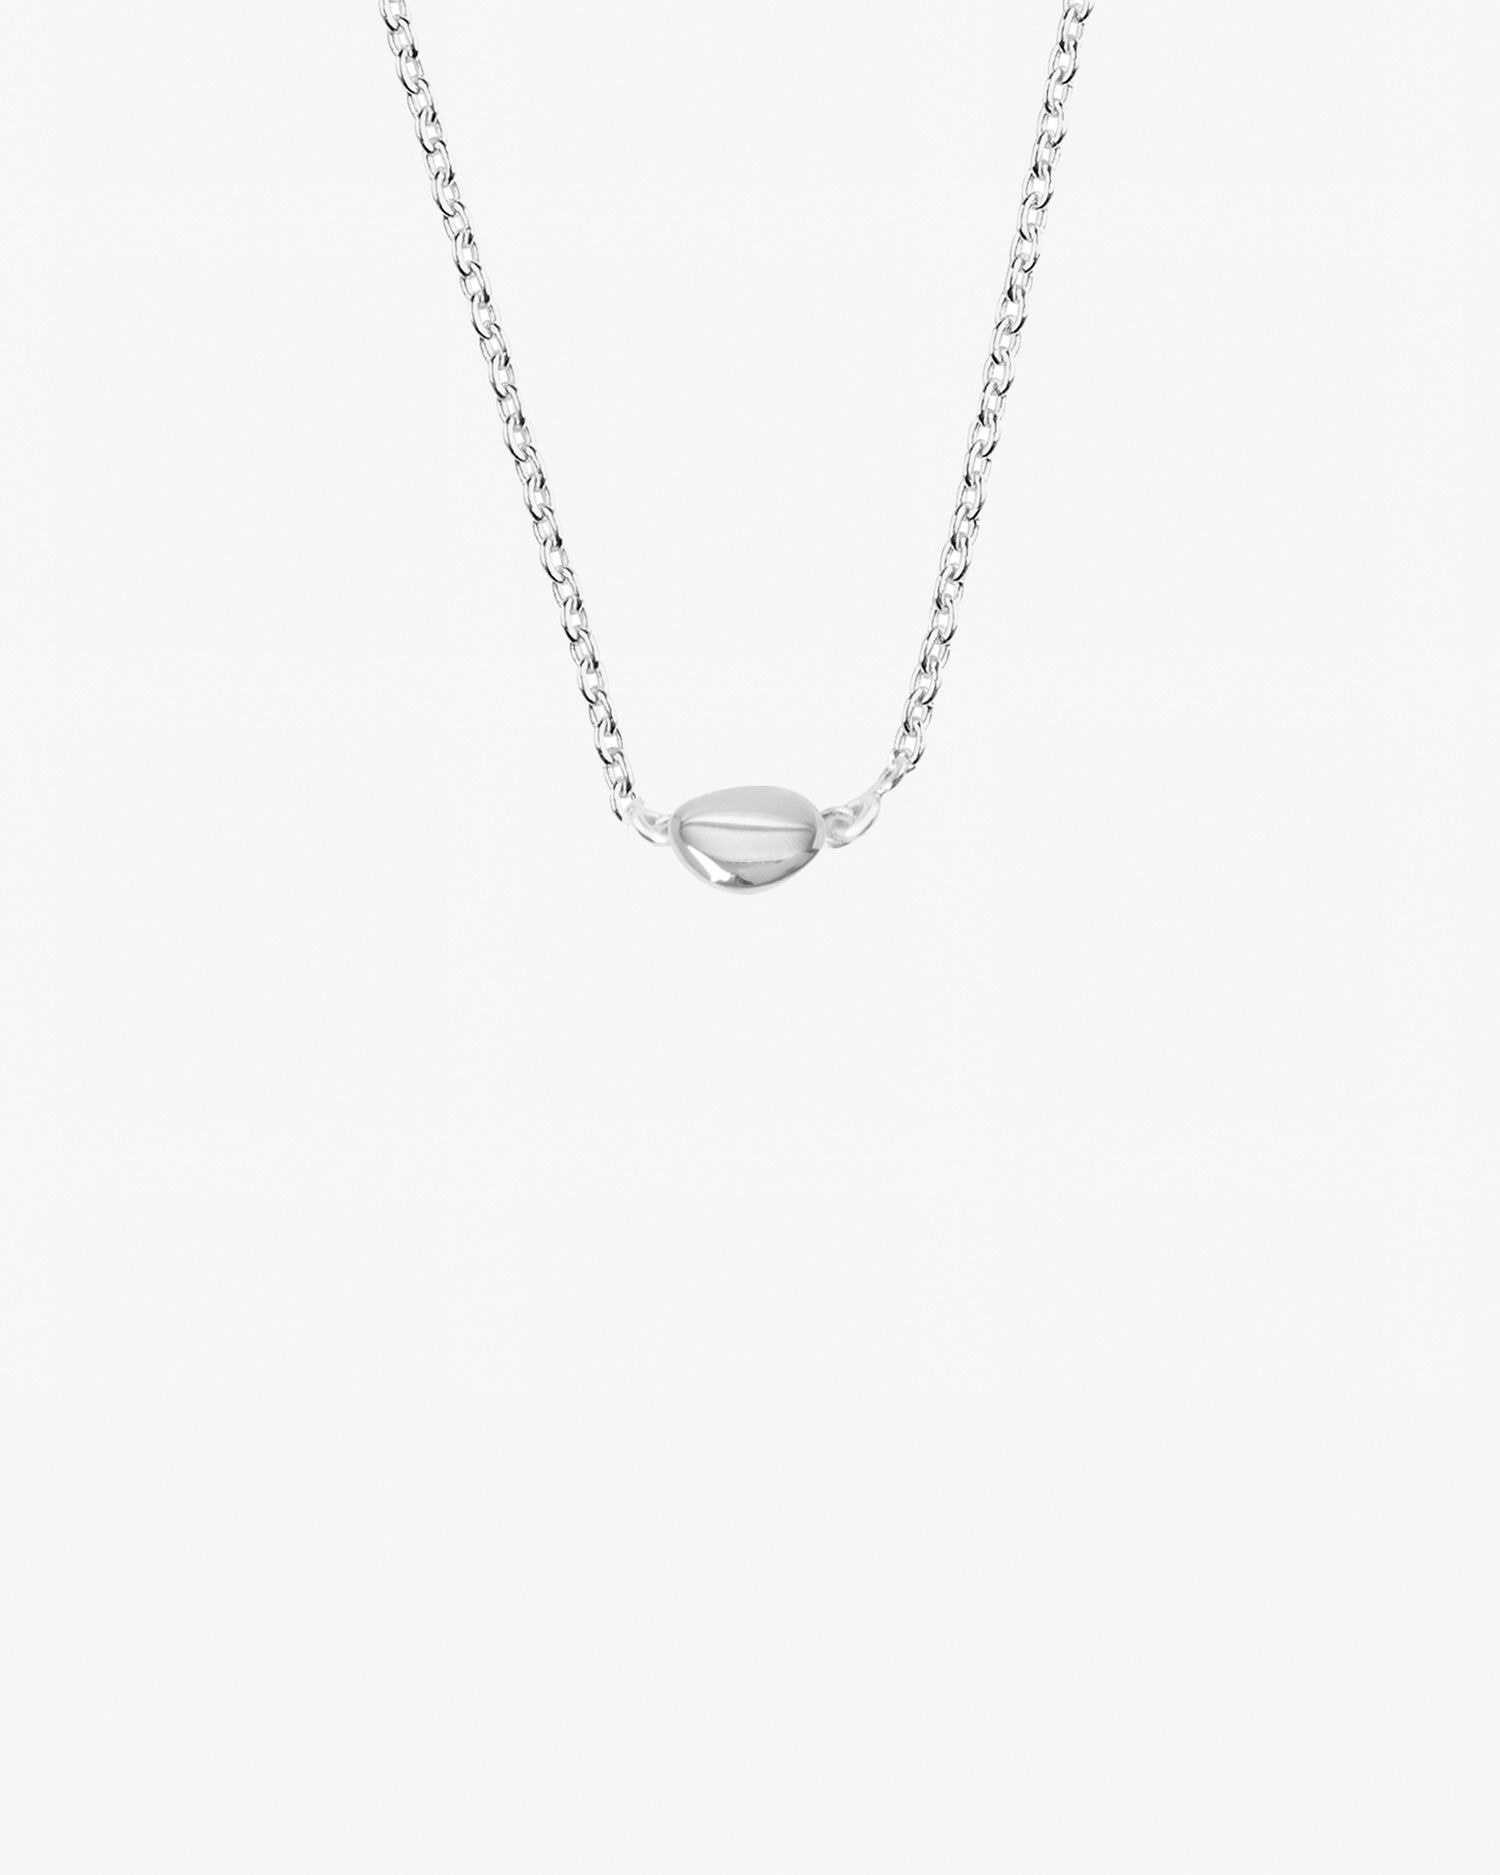 Morning-Dew-petite-necklace-02